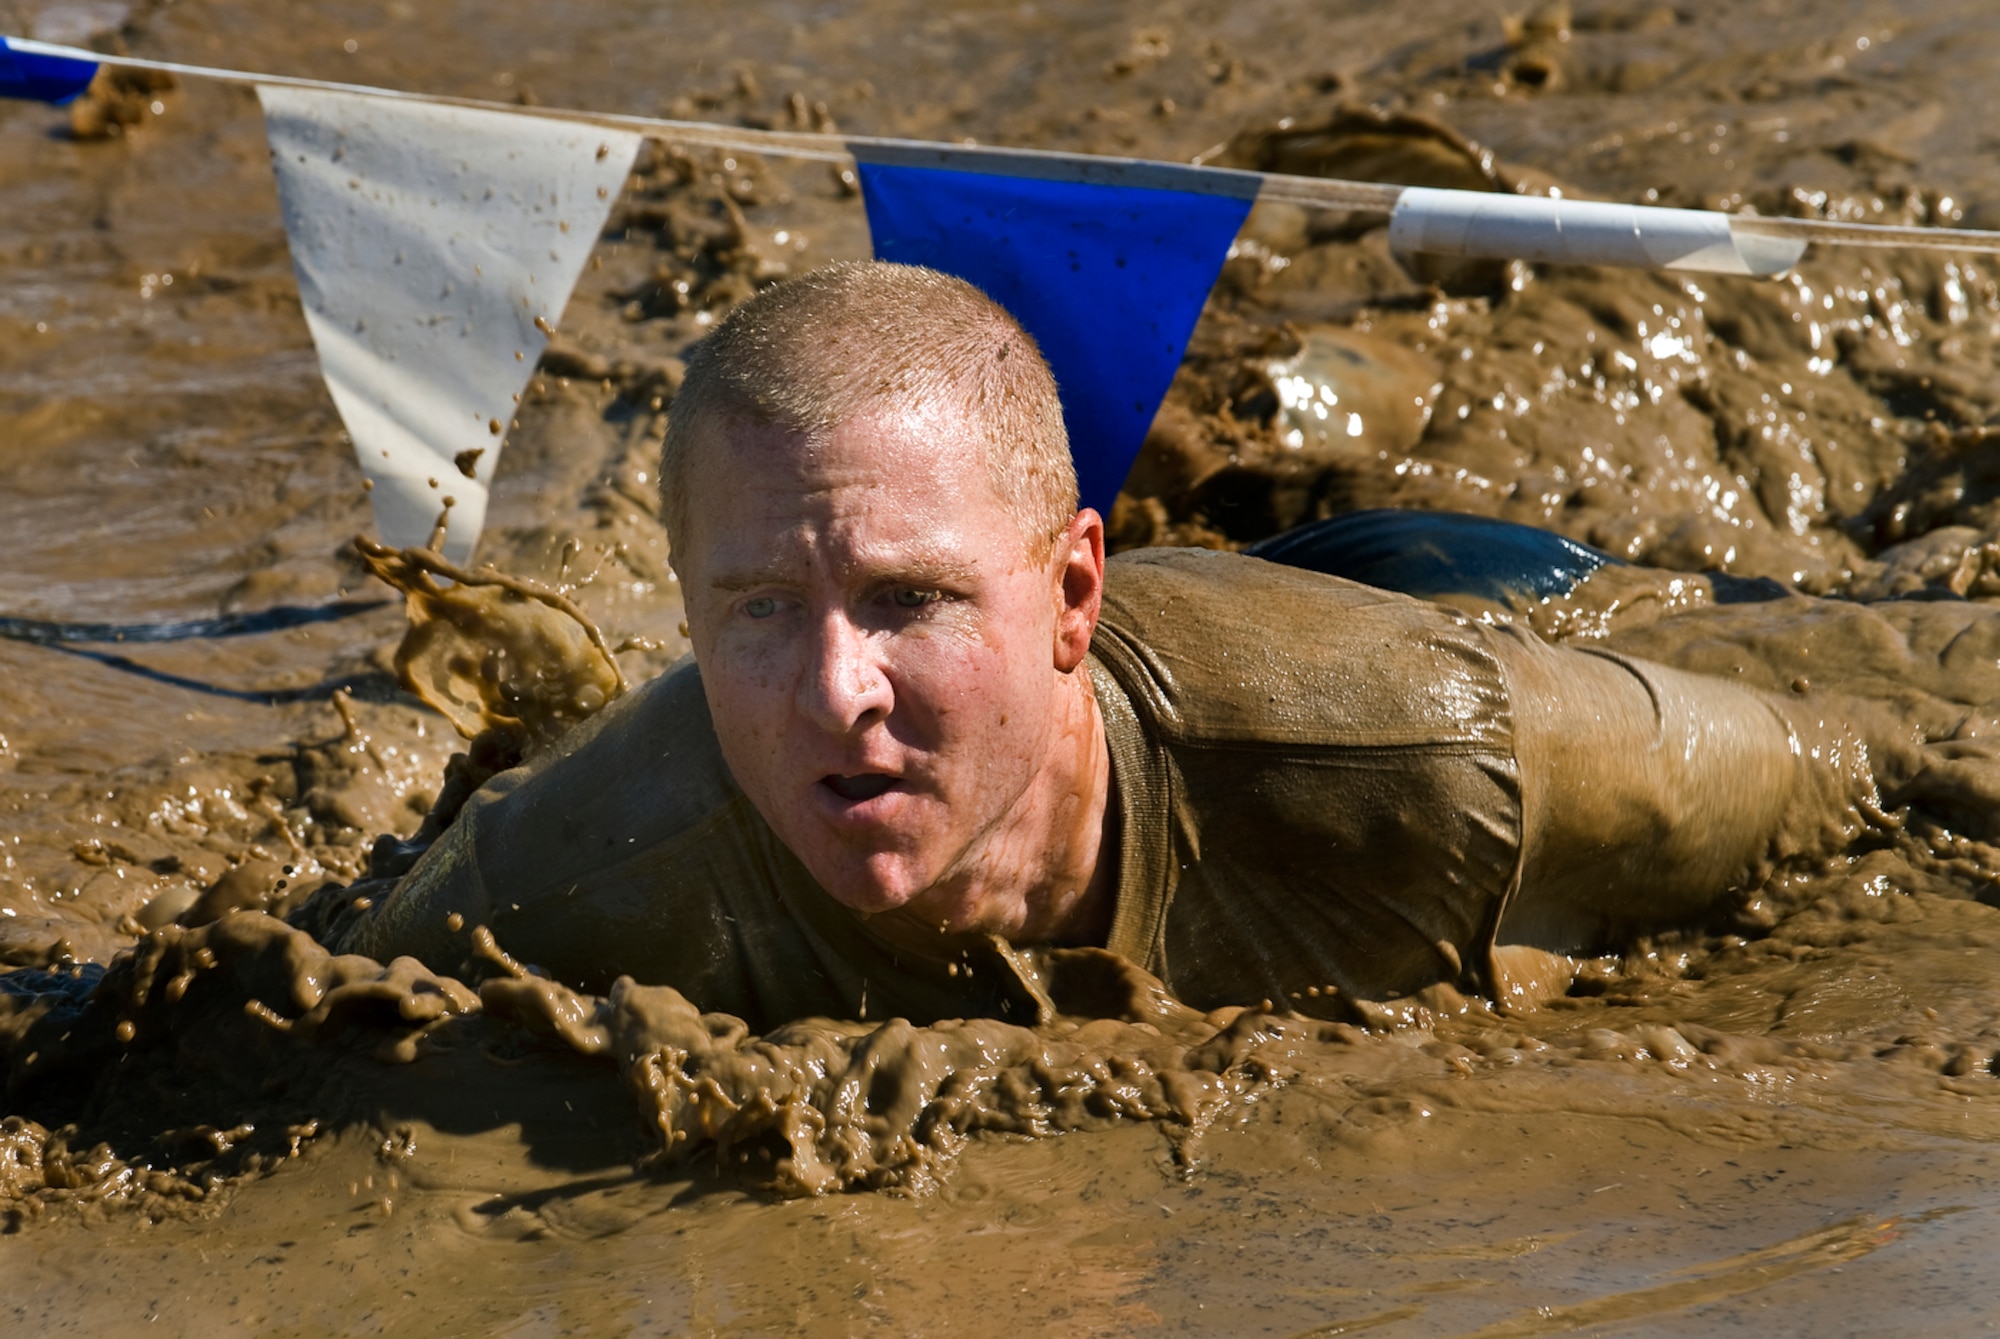 Master Sgt. Craig Brown crawls through the famed mud pit during the 10th Annual Mather Mud Run in Rancho Cordova, Calif., Sept. 5, 2009, during Air Force Week Sacramento. The Mud Run features a 5-mile or 2-mile obstacle course boot camp challenge with low walls, tunnel crawls, a tire run, hay bale jumps and a low-crawl mud pit. Sergeant Brown is a member of the 615th Contingency Response Wing at Travis Air Force Base, Calif. (U.S. Air Force photo/Staff Sgt. Bennie J. Davis III) 

